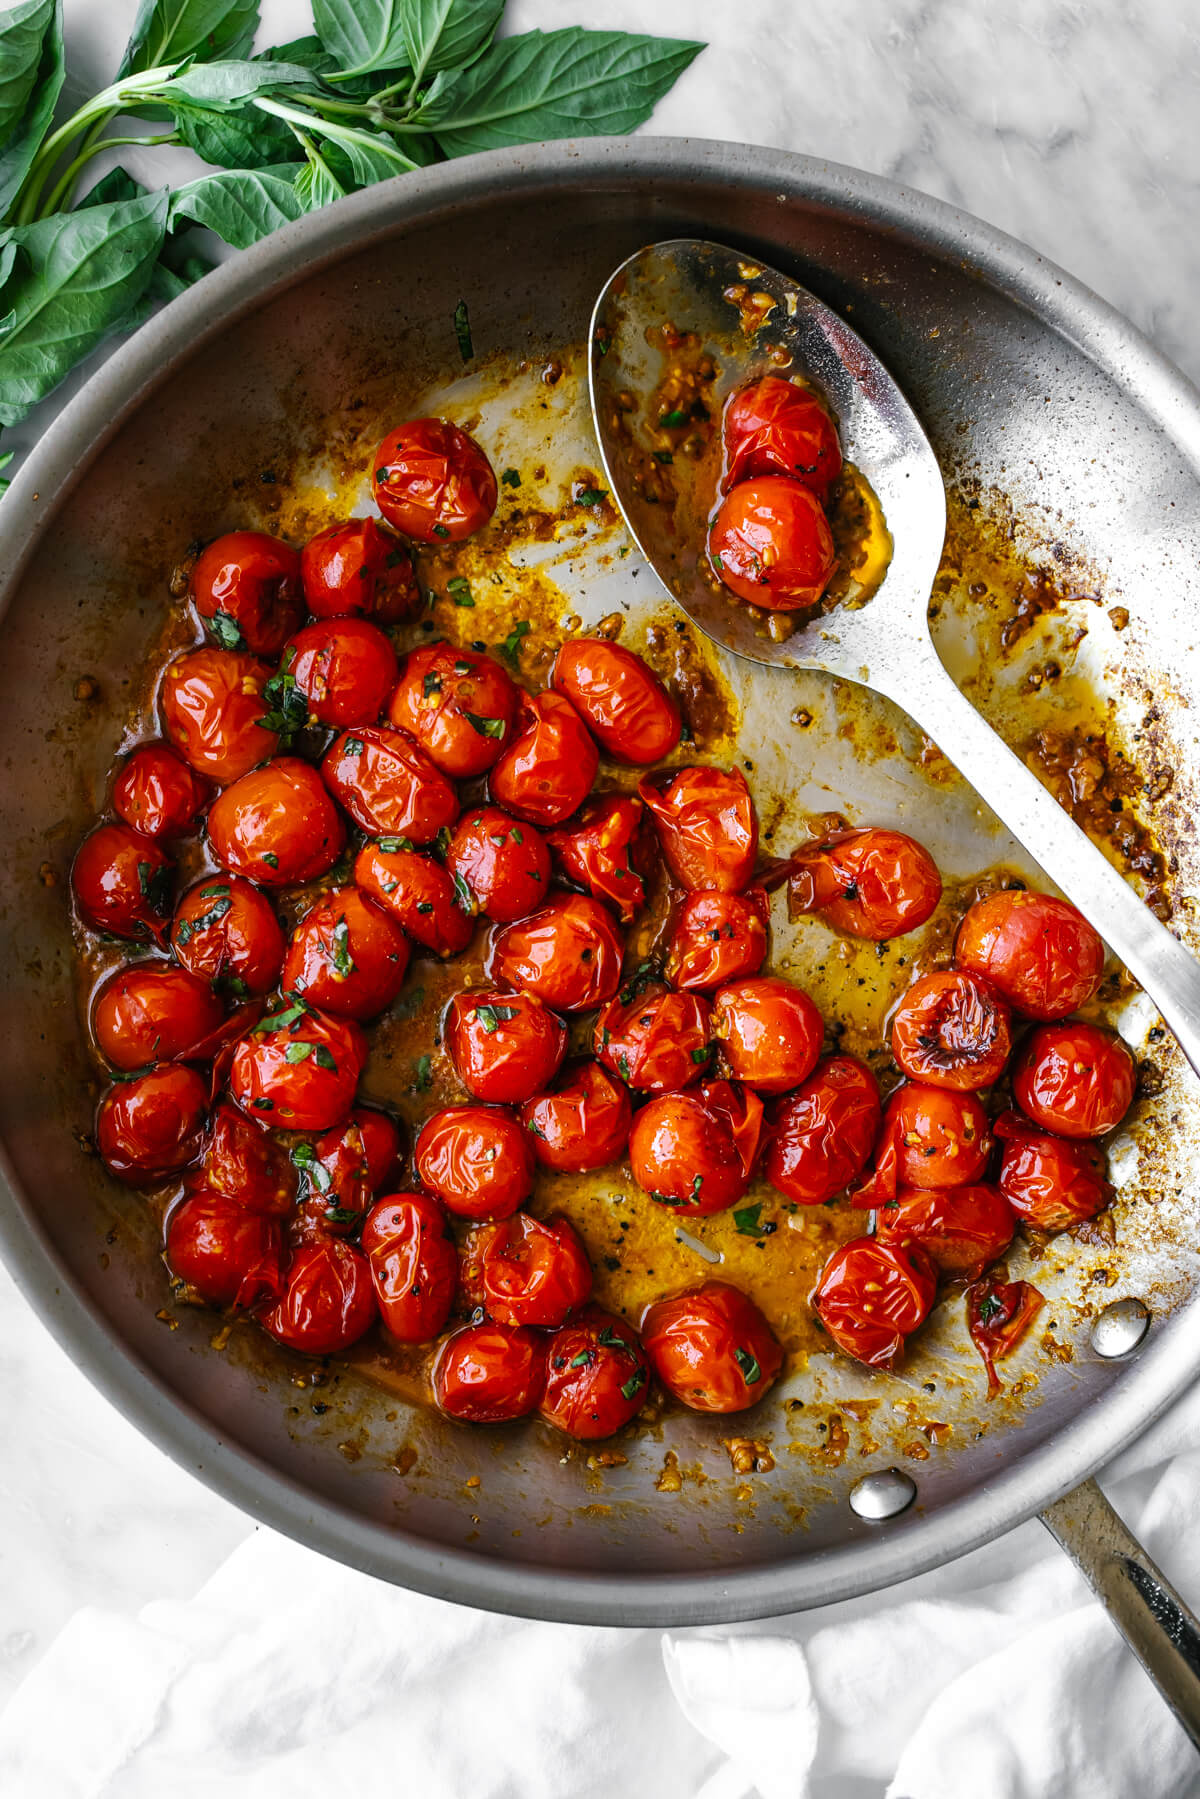 Blistered tomatoes in a pan with a large serving spoon.